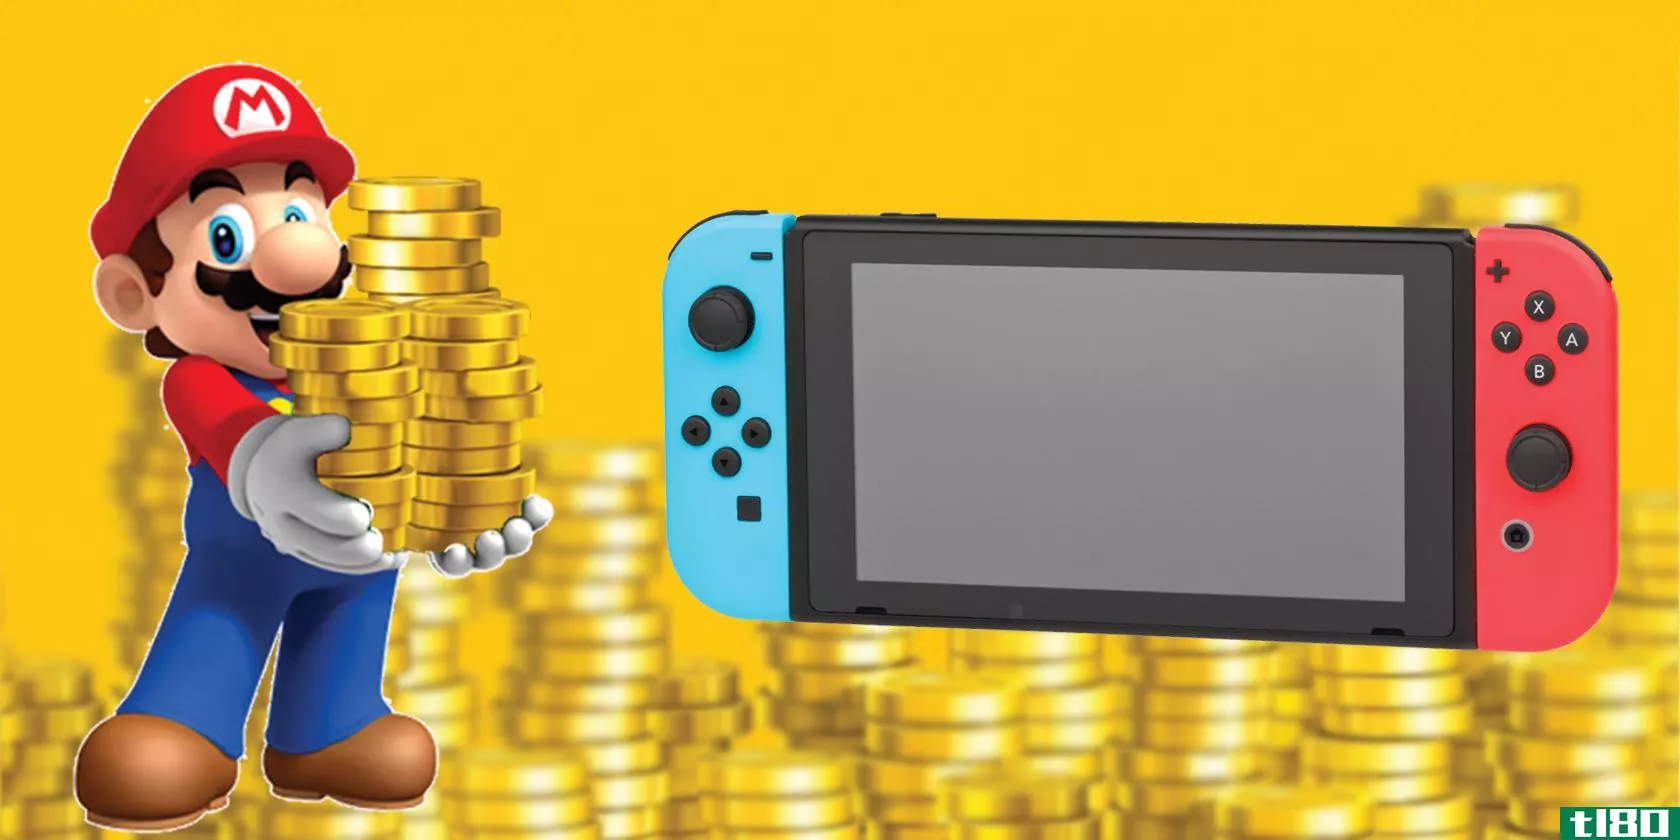 mario with coins standing next to a switch c***ole